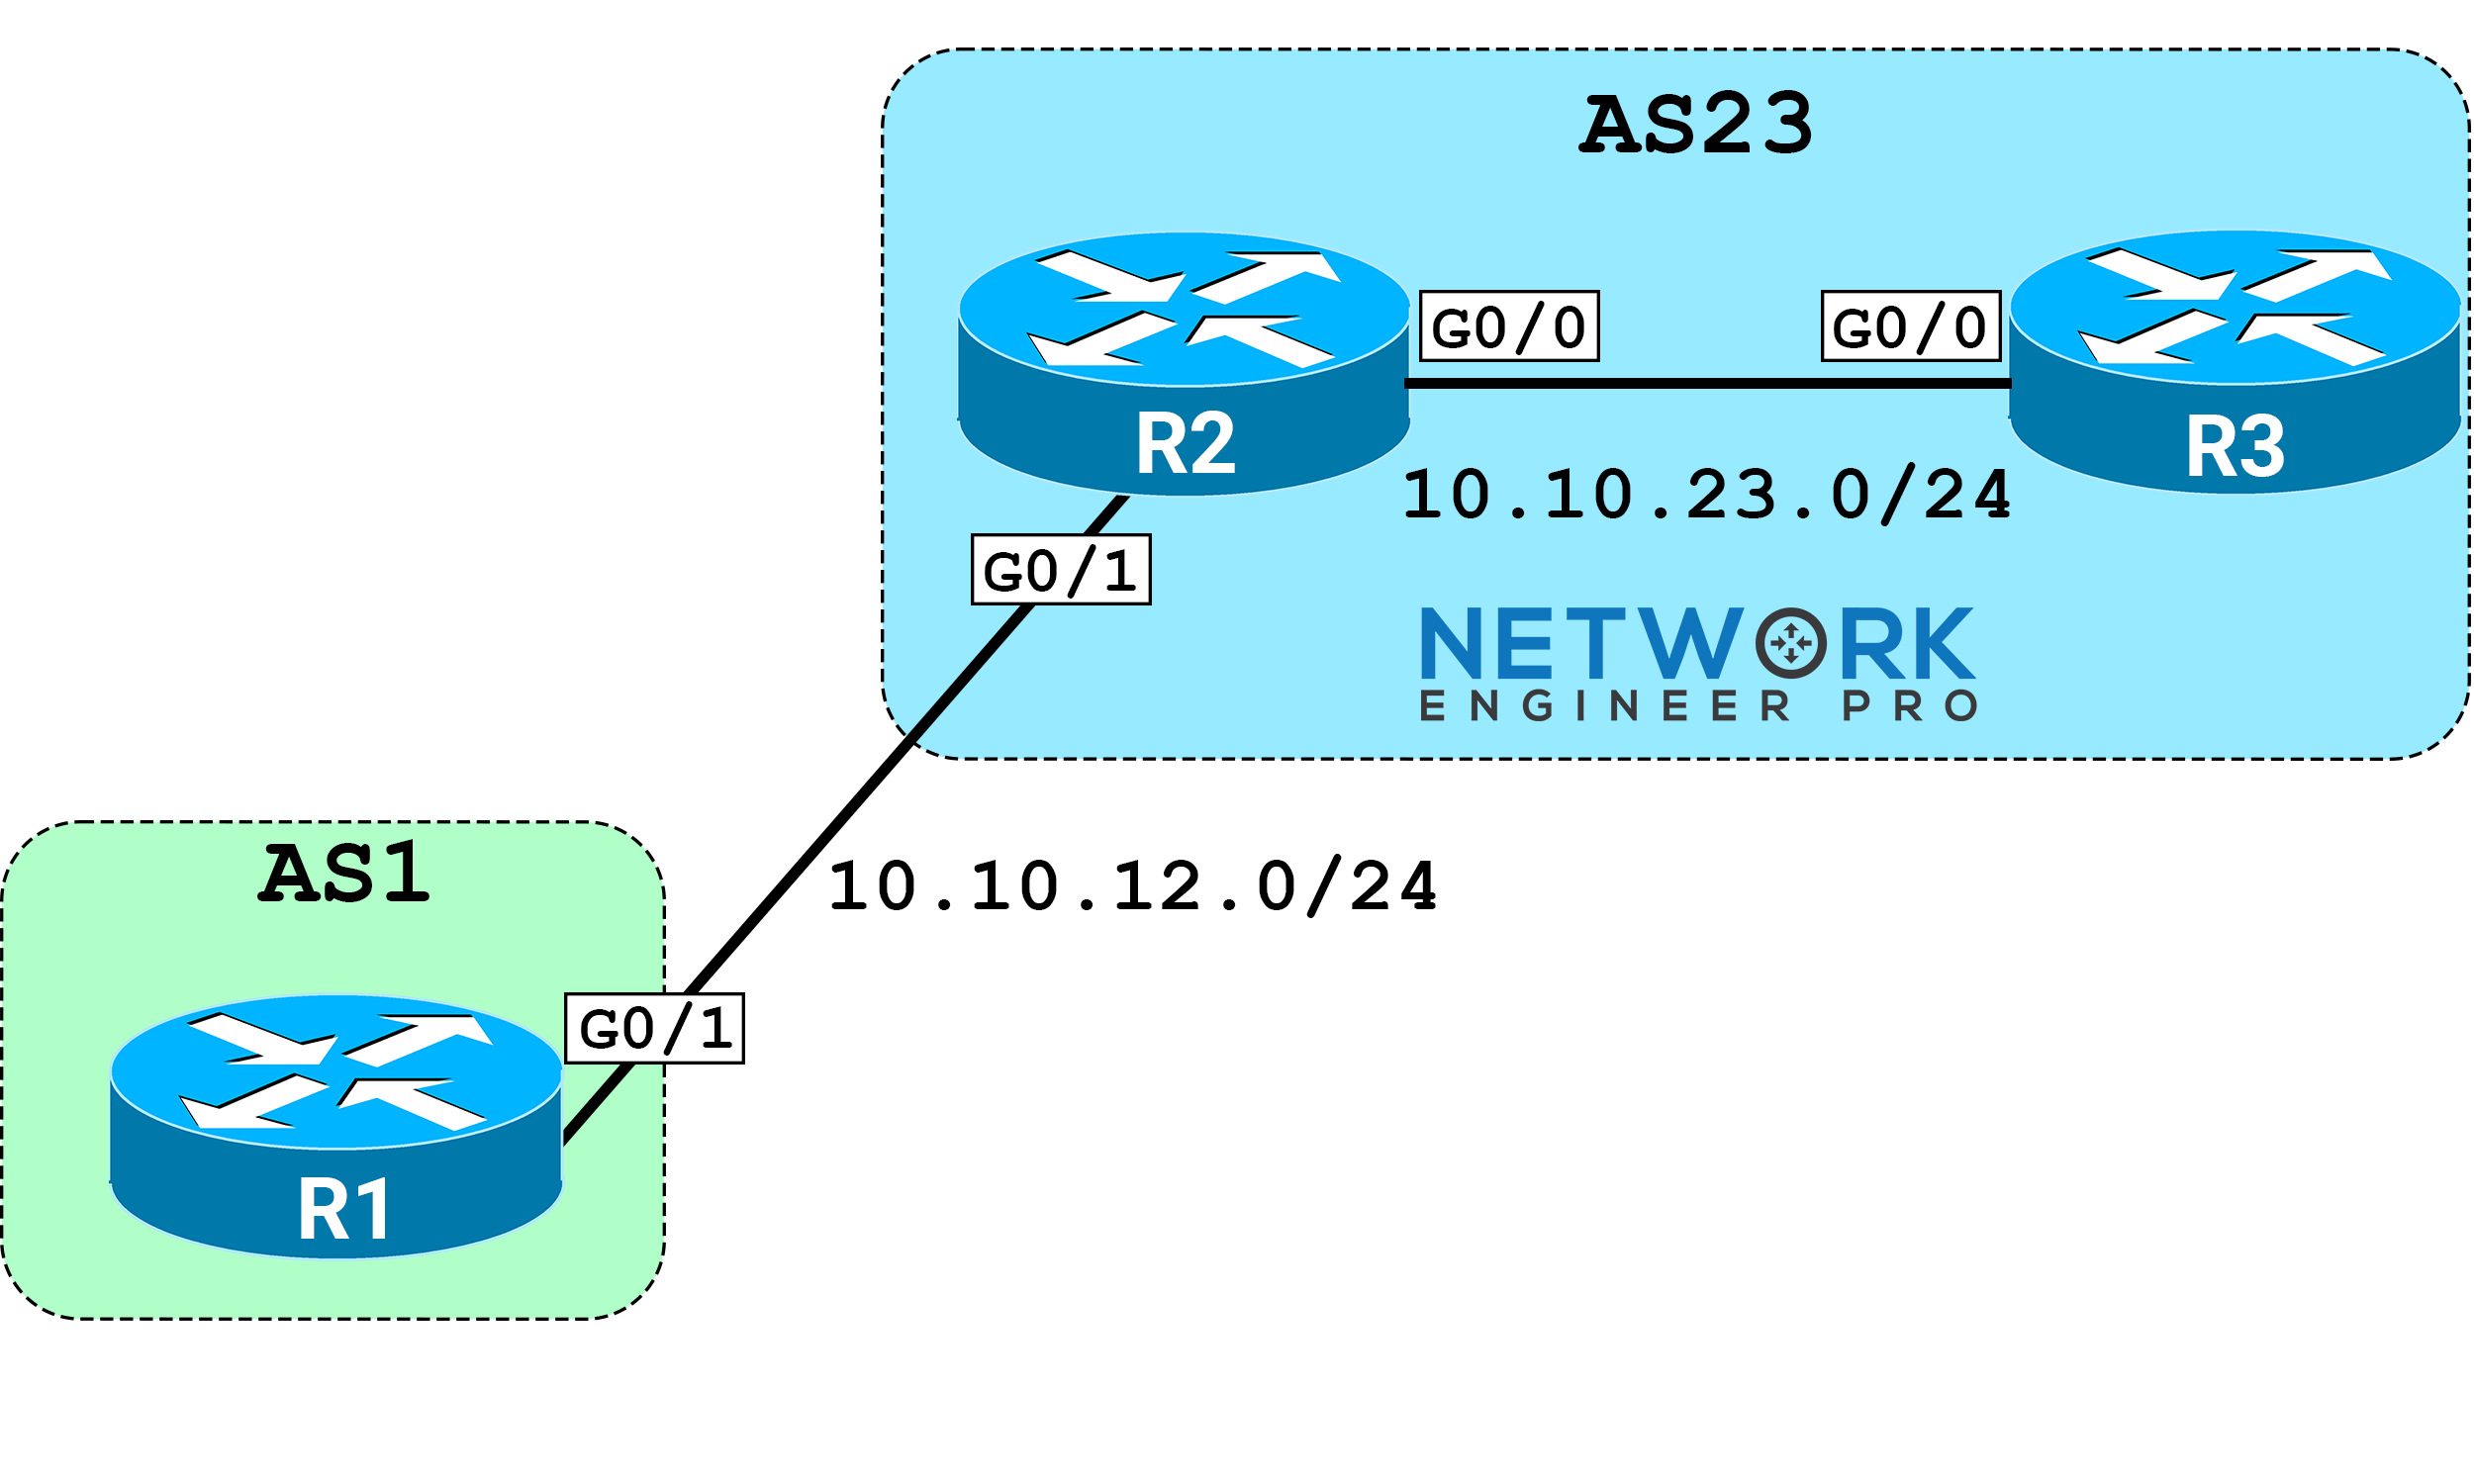 Topology diagram showing BGP distribute list filtering with three routers: R1 in AS1, R2 and R3 in AS23.